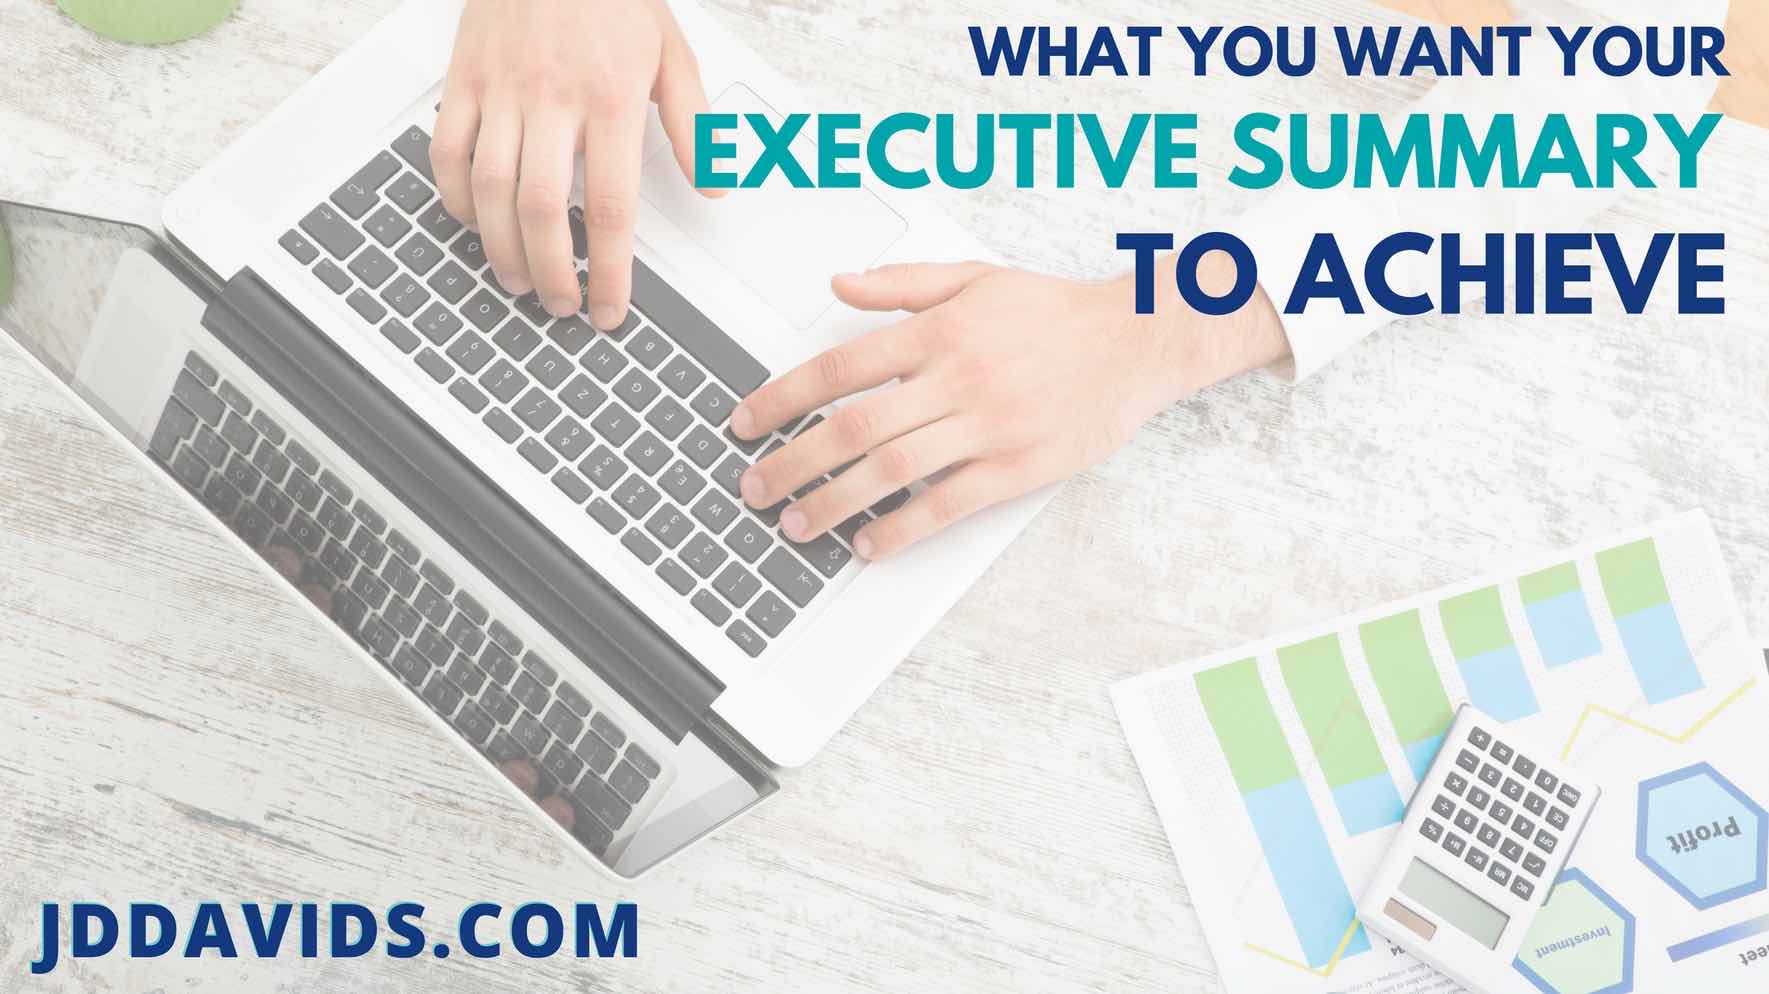 What You Want Your Executive Summary to Achieve